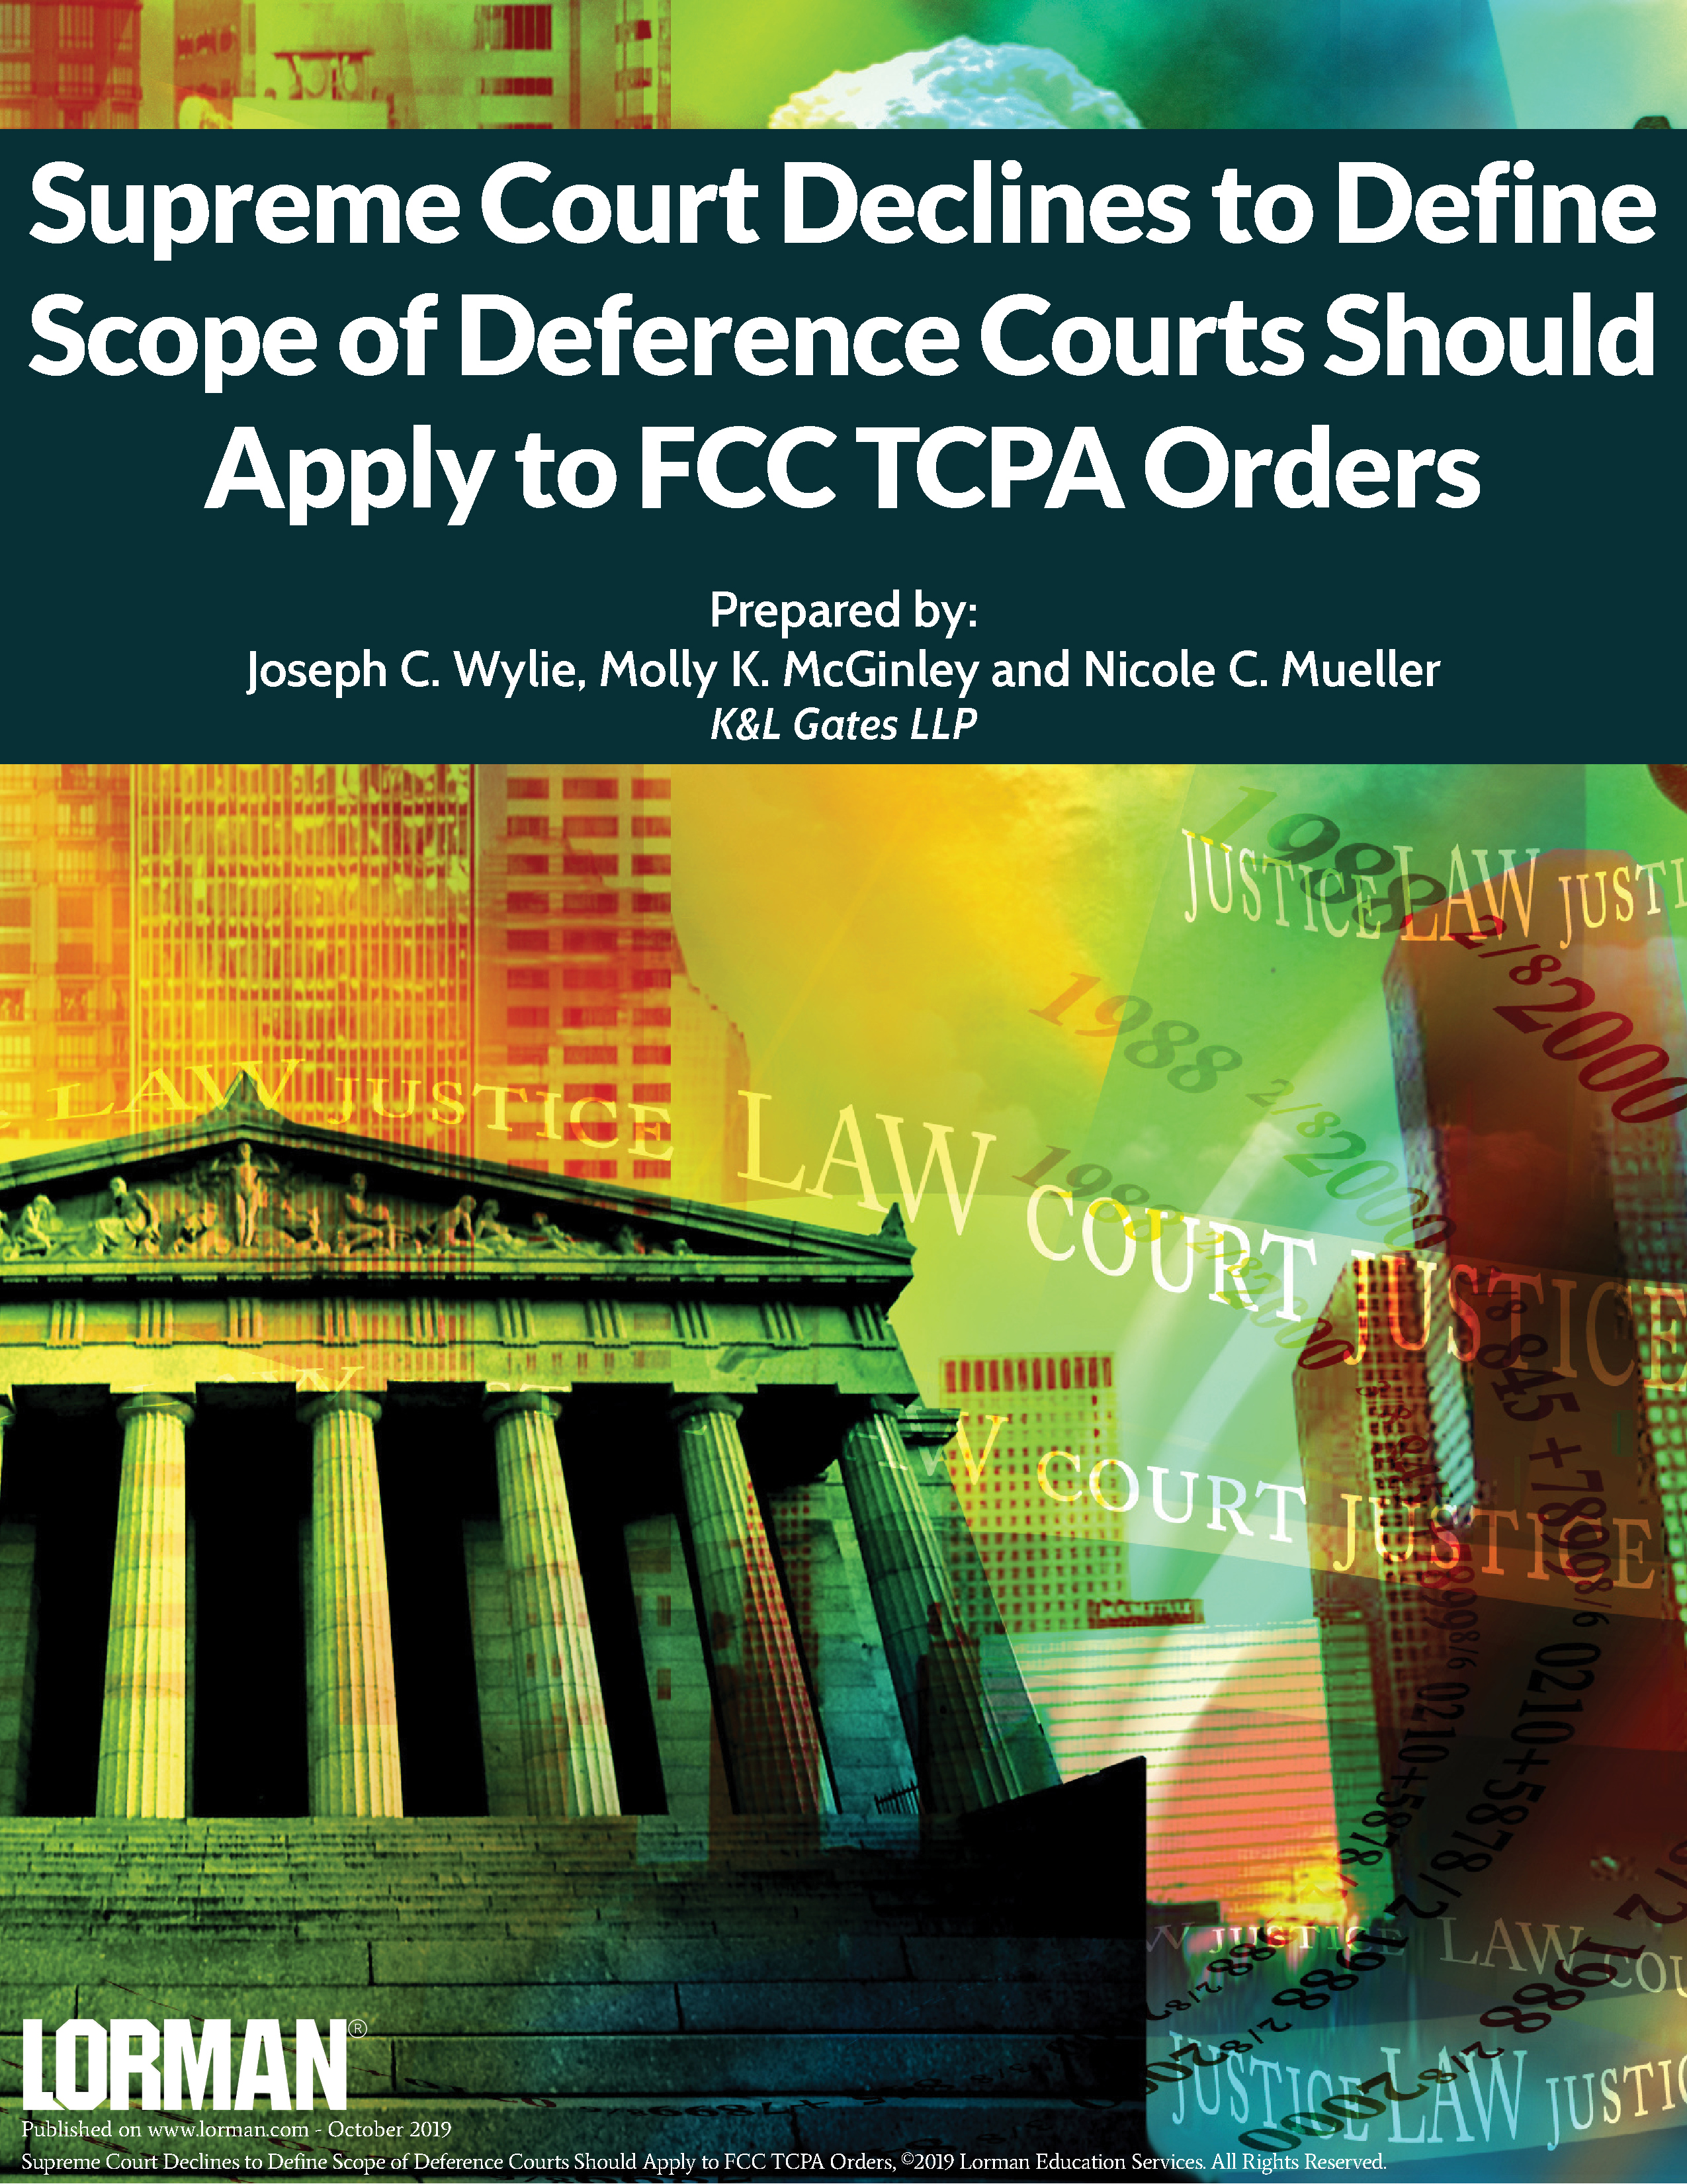 Supreme Court Declines to Define Scope of Deference Courts Should Apply to FCC TCPA Orders